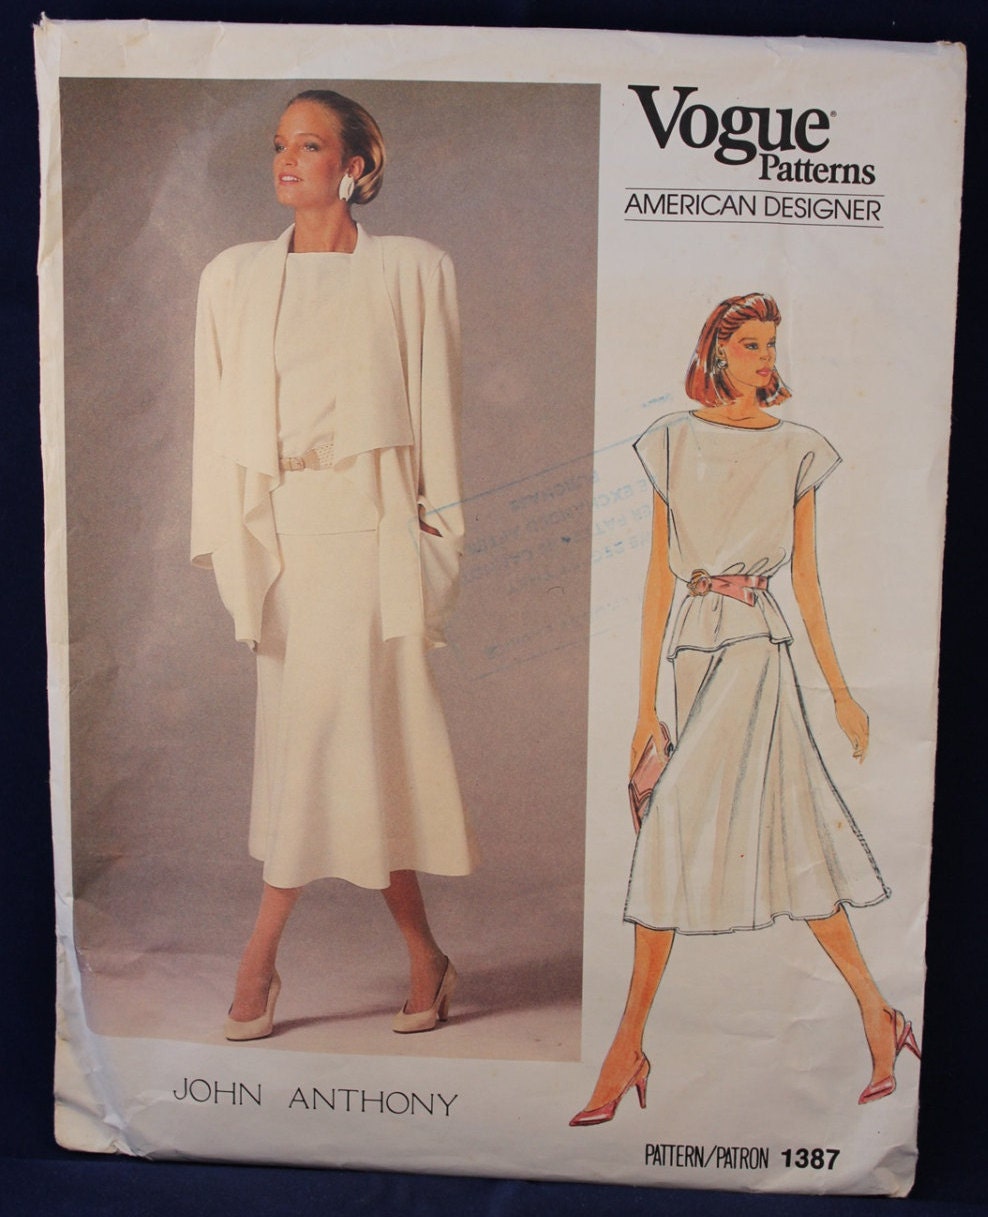 Vogue Designer Sewing Pattern for a Women's Top Skirt